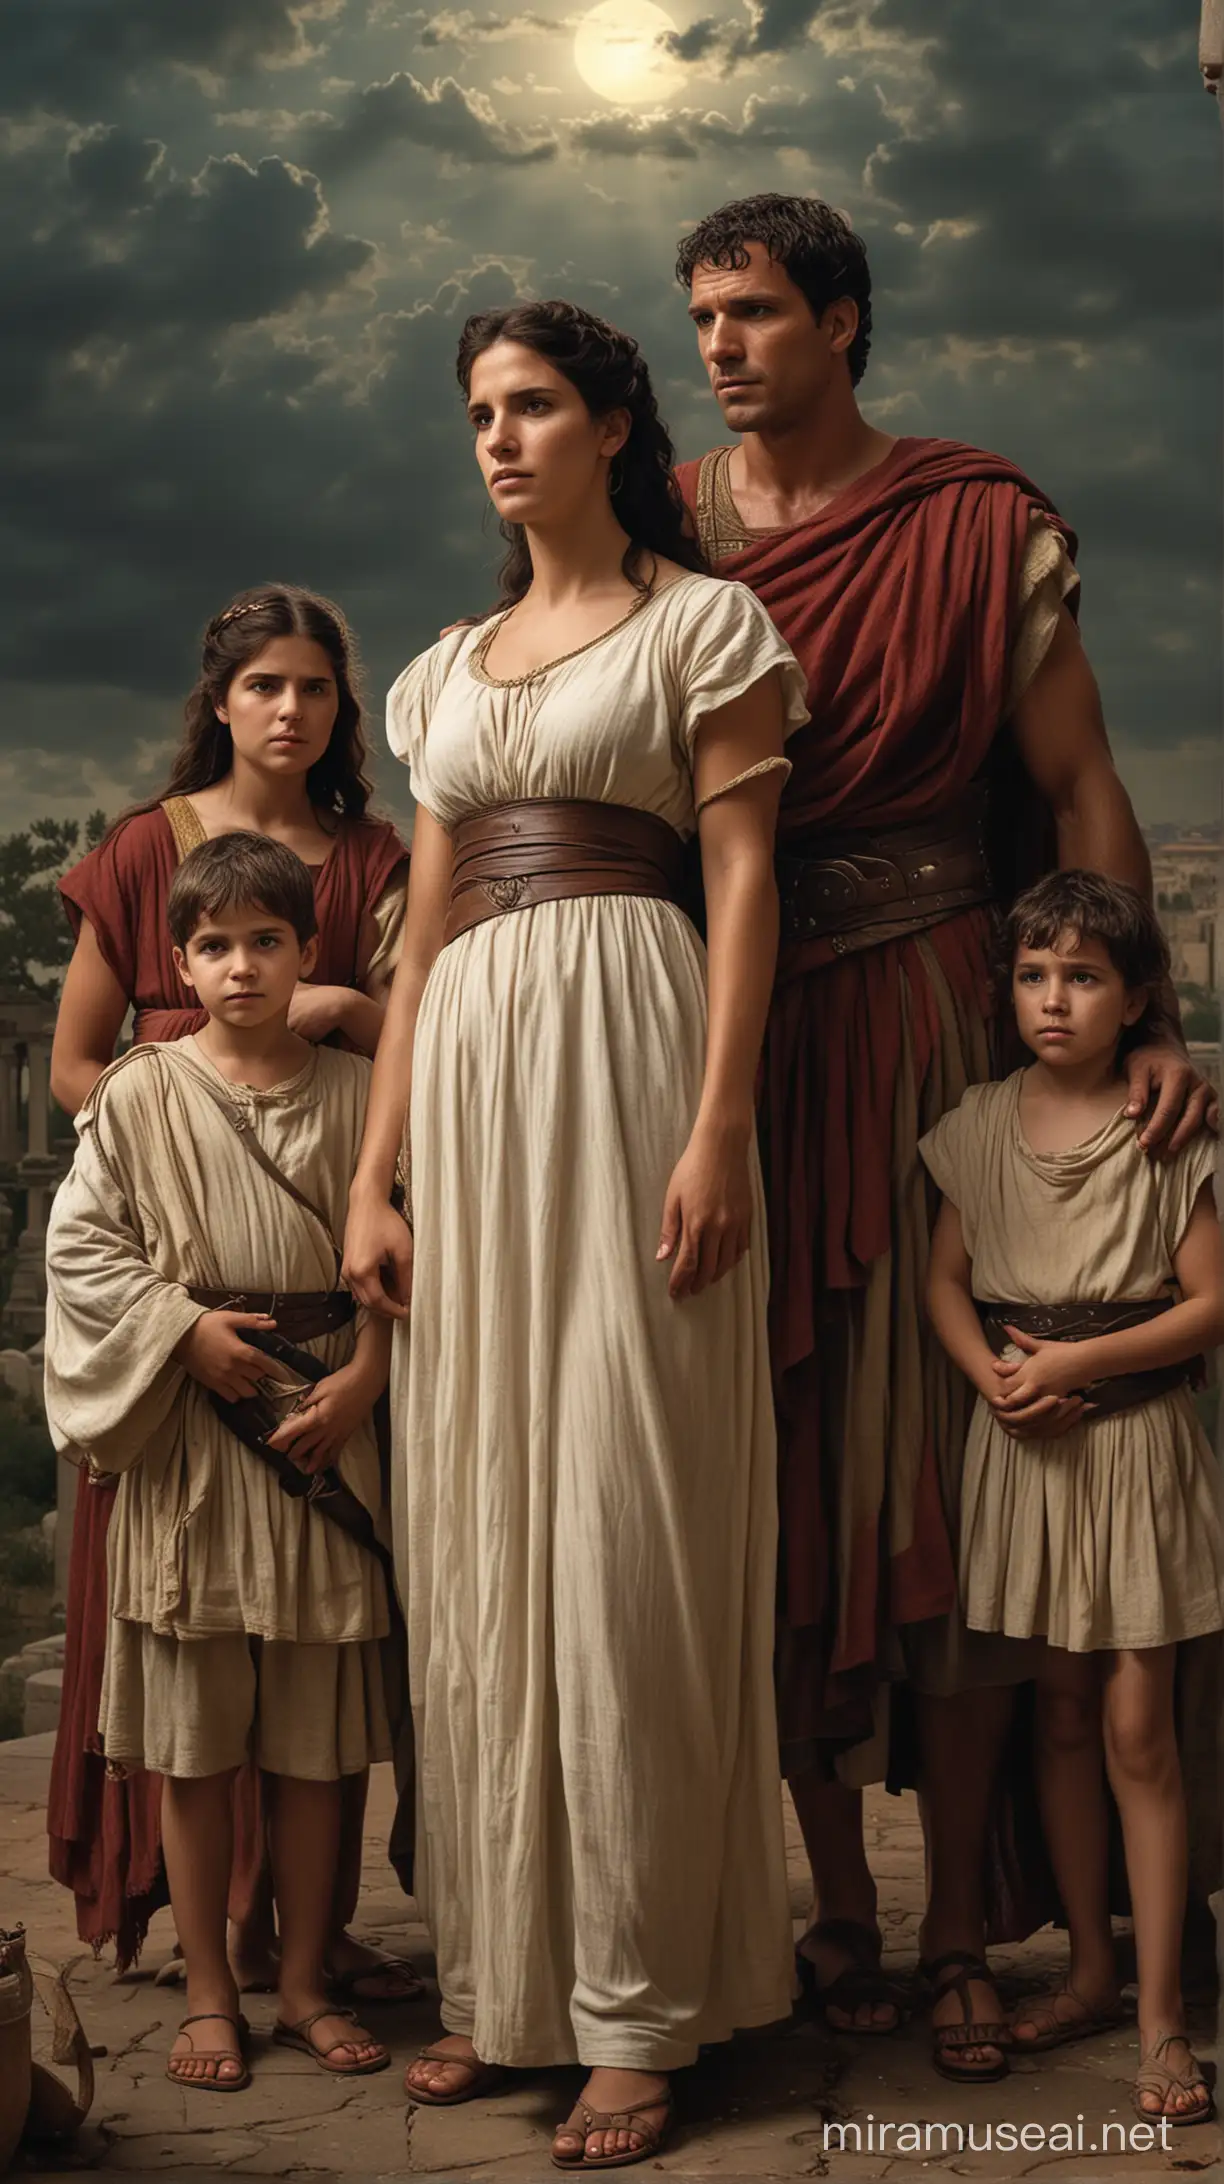 Mark Antony and Octavia with their three children in a moody background